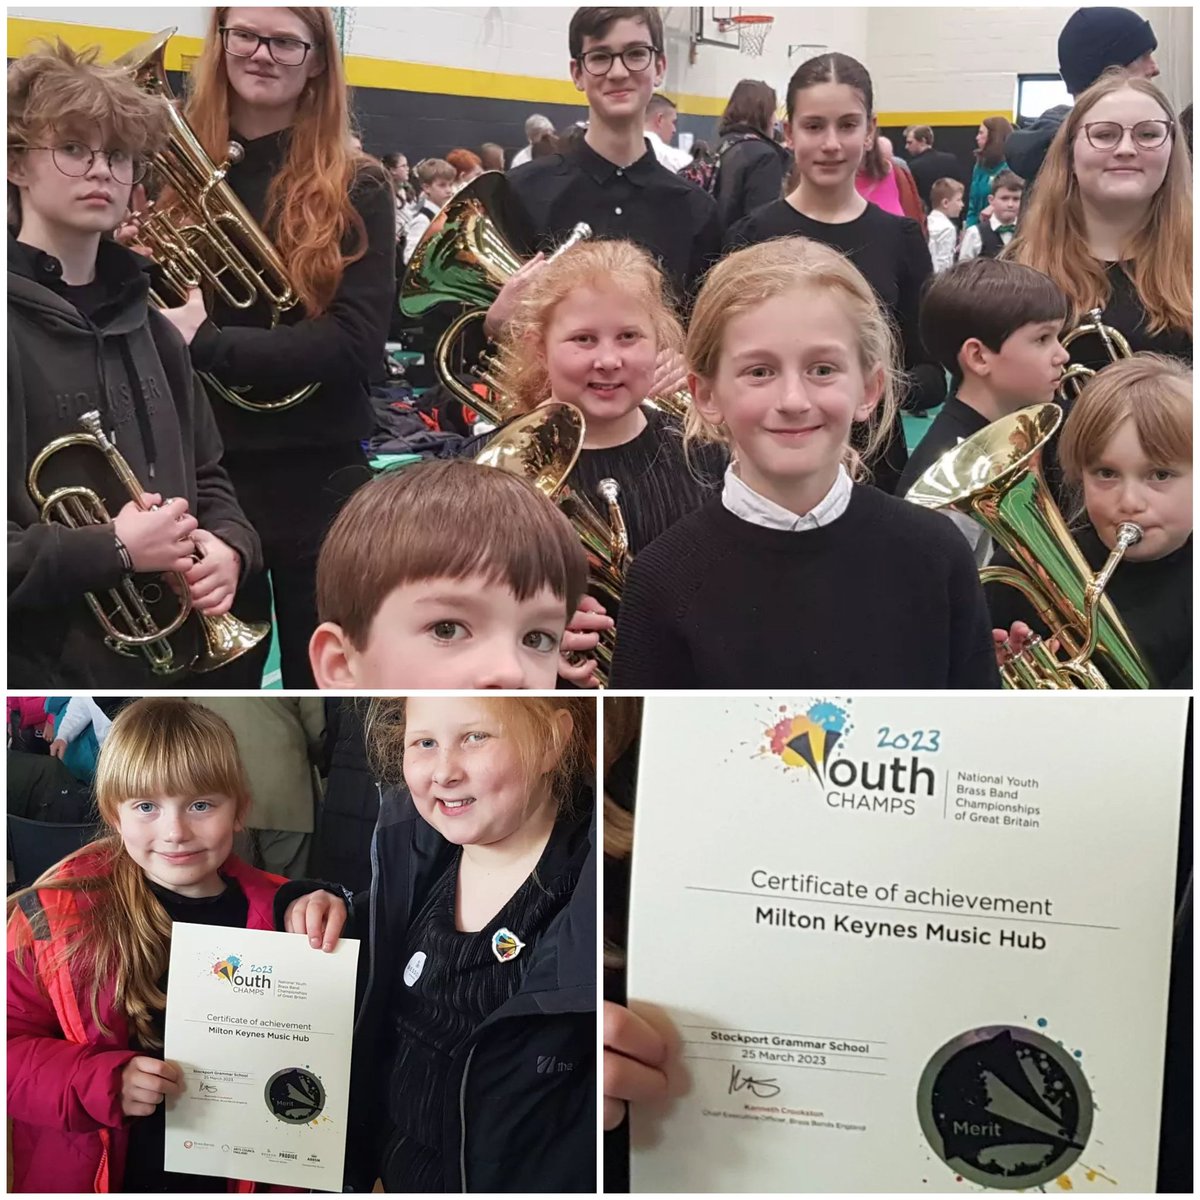 Didn't they do well?! Only 2 rehearsals with their MK Music Hub colleagues and they got some great feedback and a Merit! We are so proud of them all! 🤗🎶🎺👍
#olneybrass #YouthChamps #brassbandengland #mkmusichub